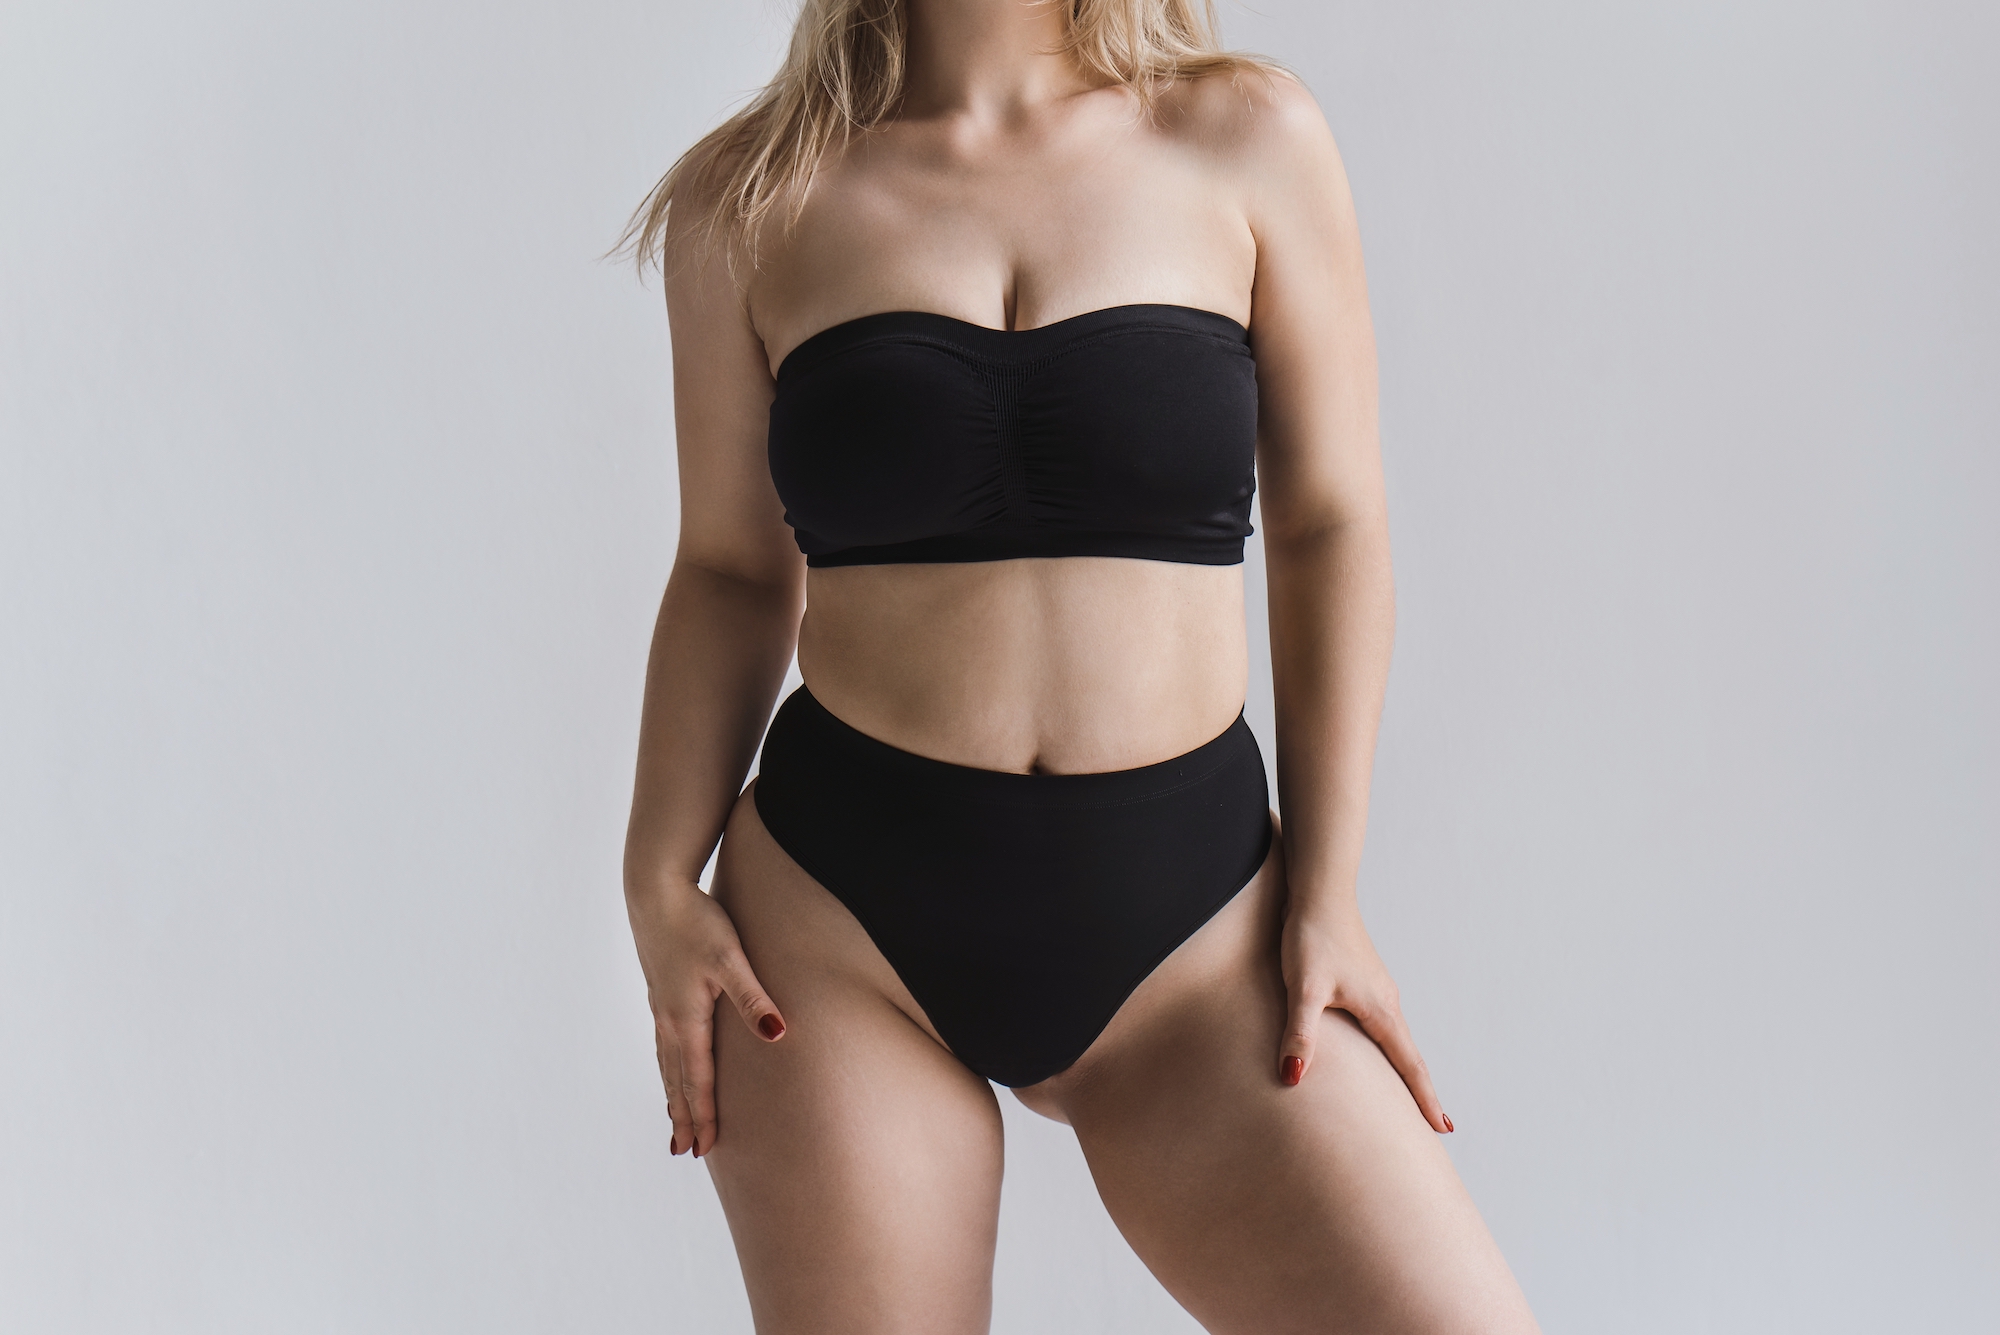 Minimizer bras work to minimize your bust – WingsLove